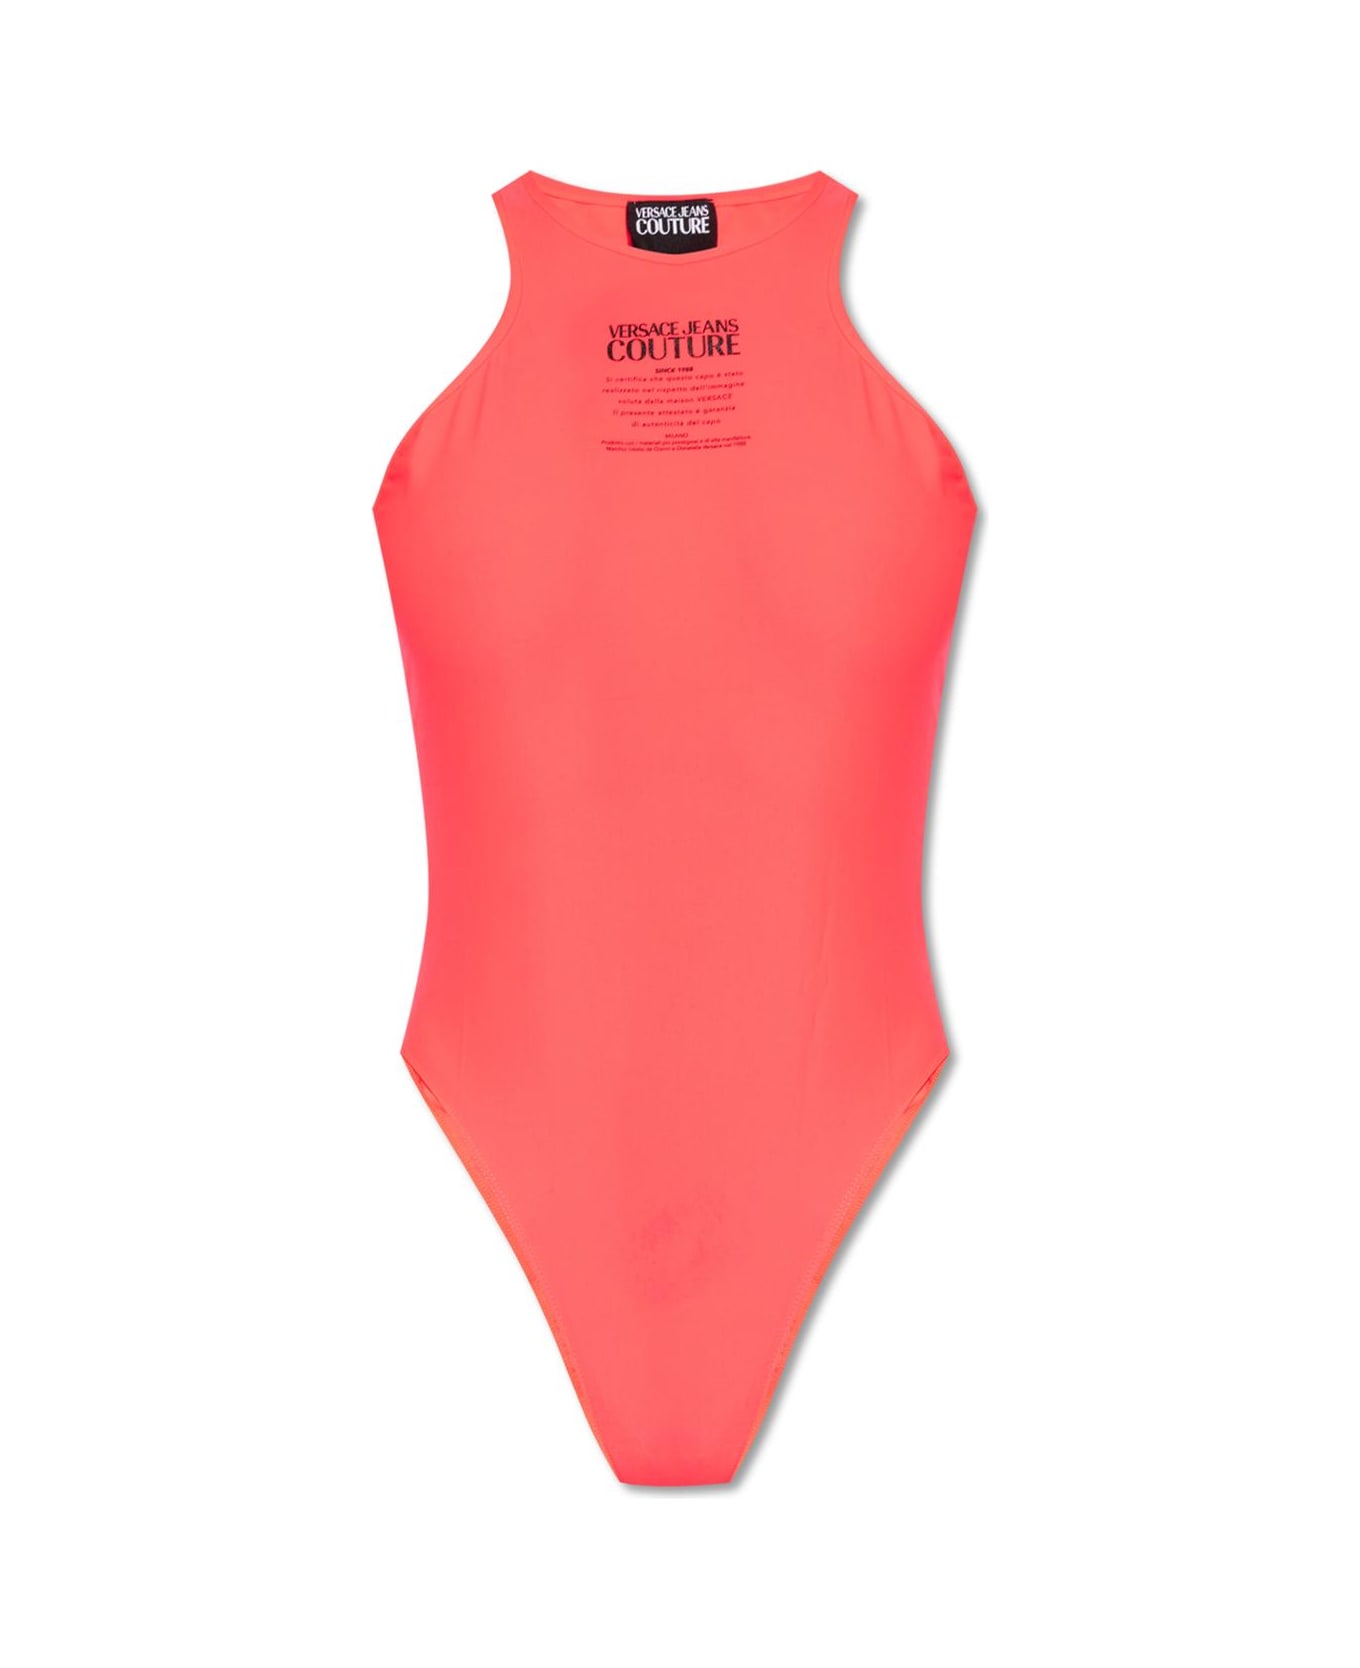 Versace Jeans Couture Sleeveless Bodysuit - Pink